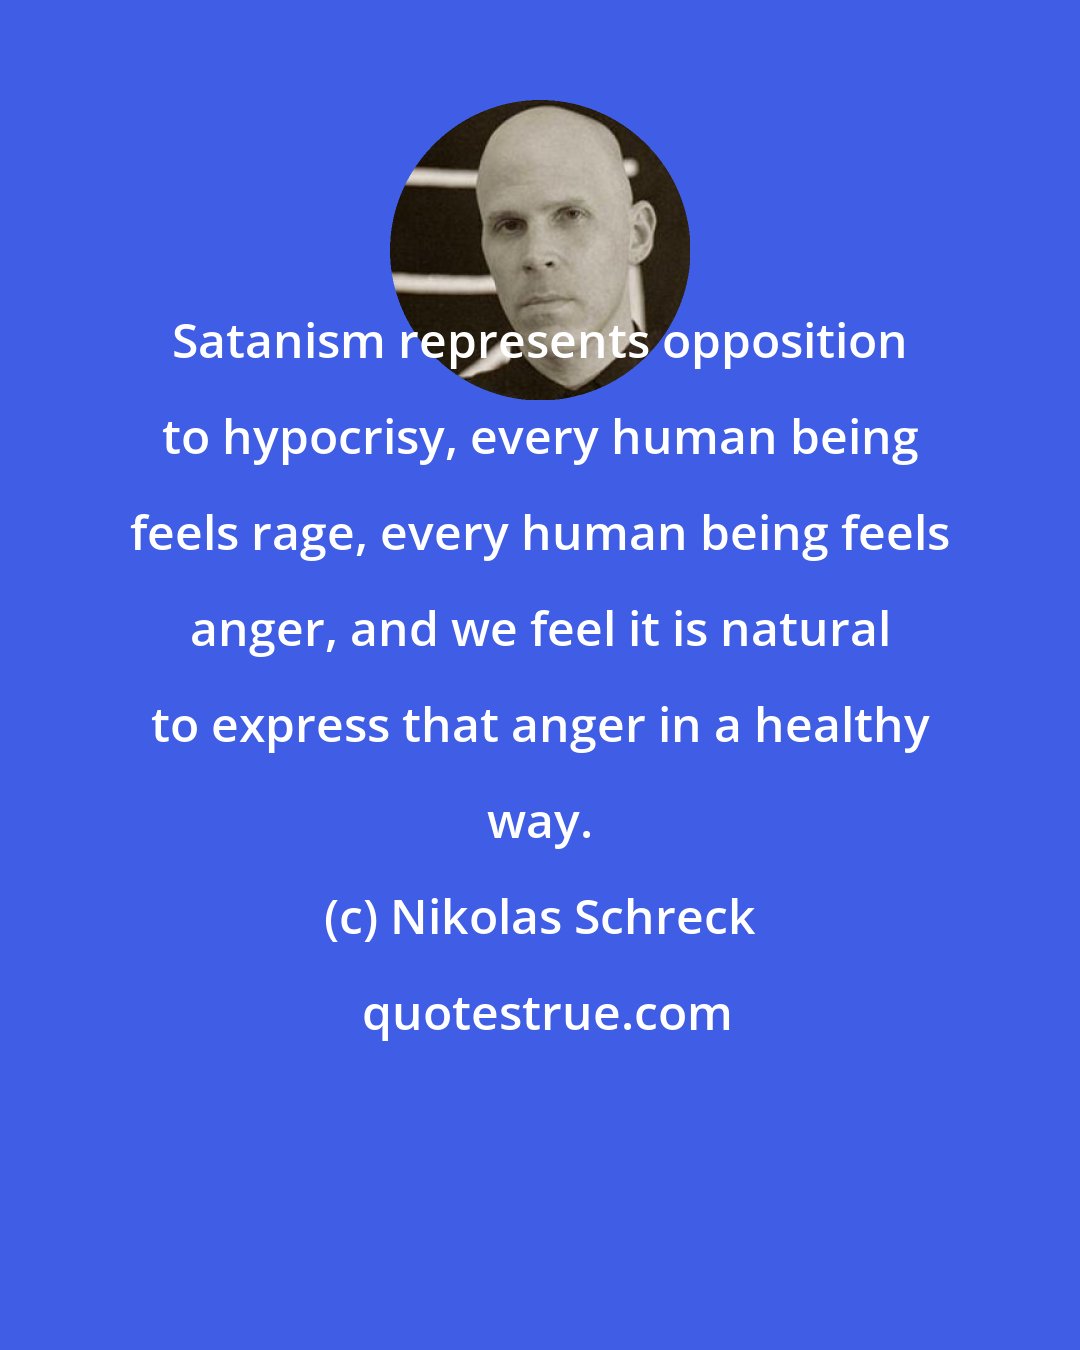 Nikolas Schreck: Satanism represents opposition to hypocrisy, every human being feels rage, every human being feels anger, and we feel it is natural to express that anger in a healthy way.